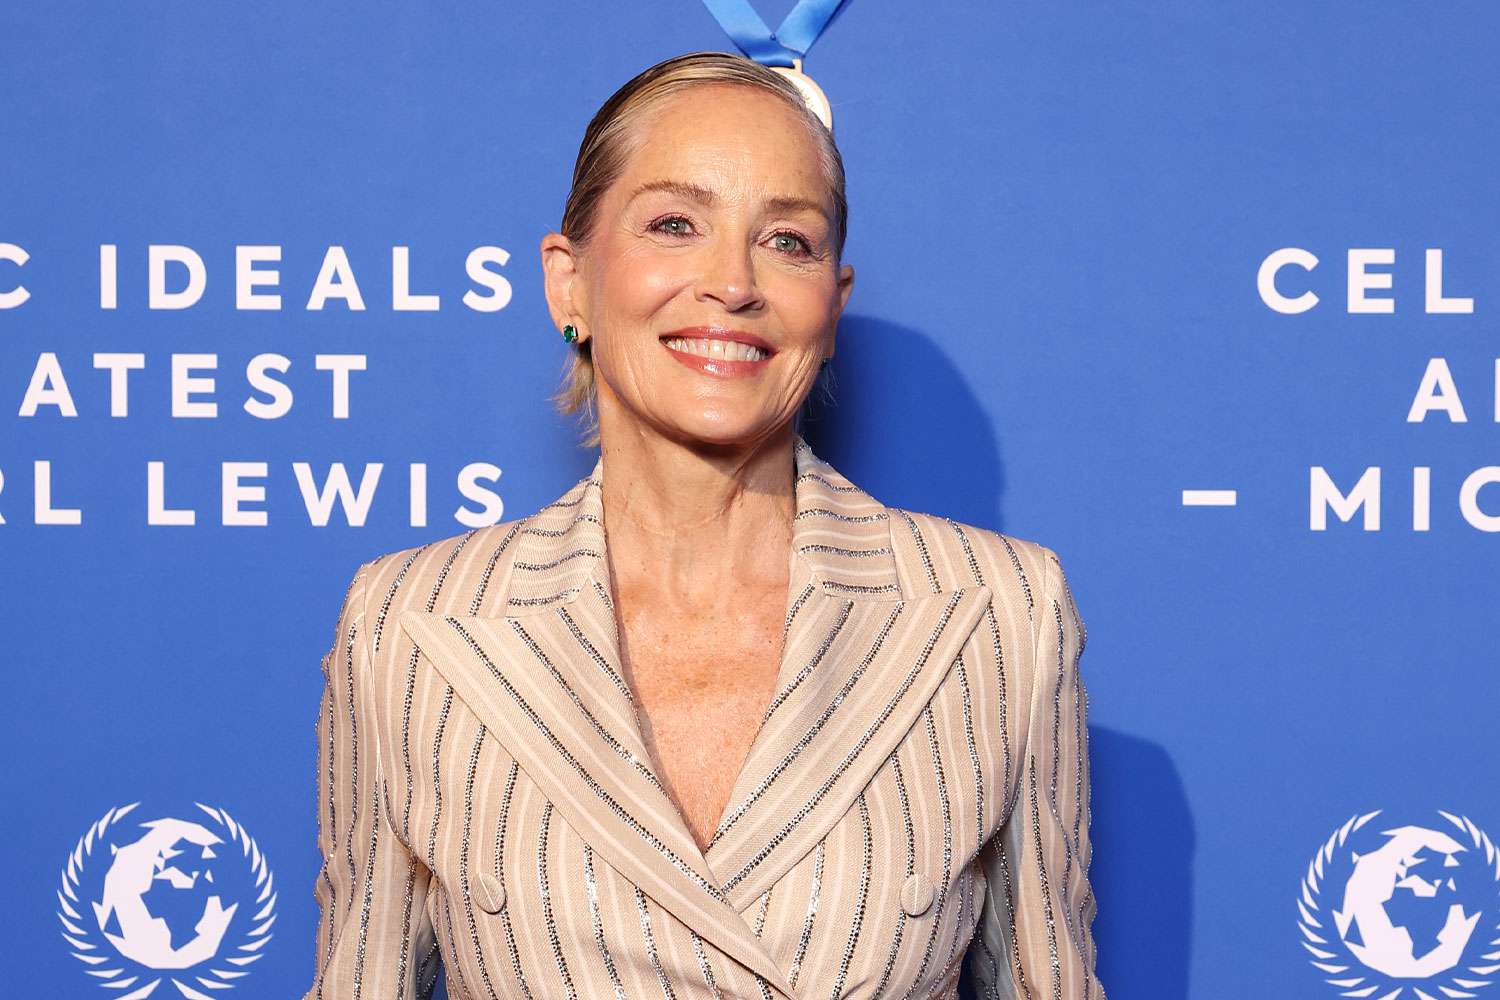 Sharon Stone Is All Smiles at the 2024 Summer Olympics, Plus Martha Stewart, Pharrell Williams and More